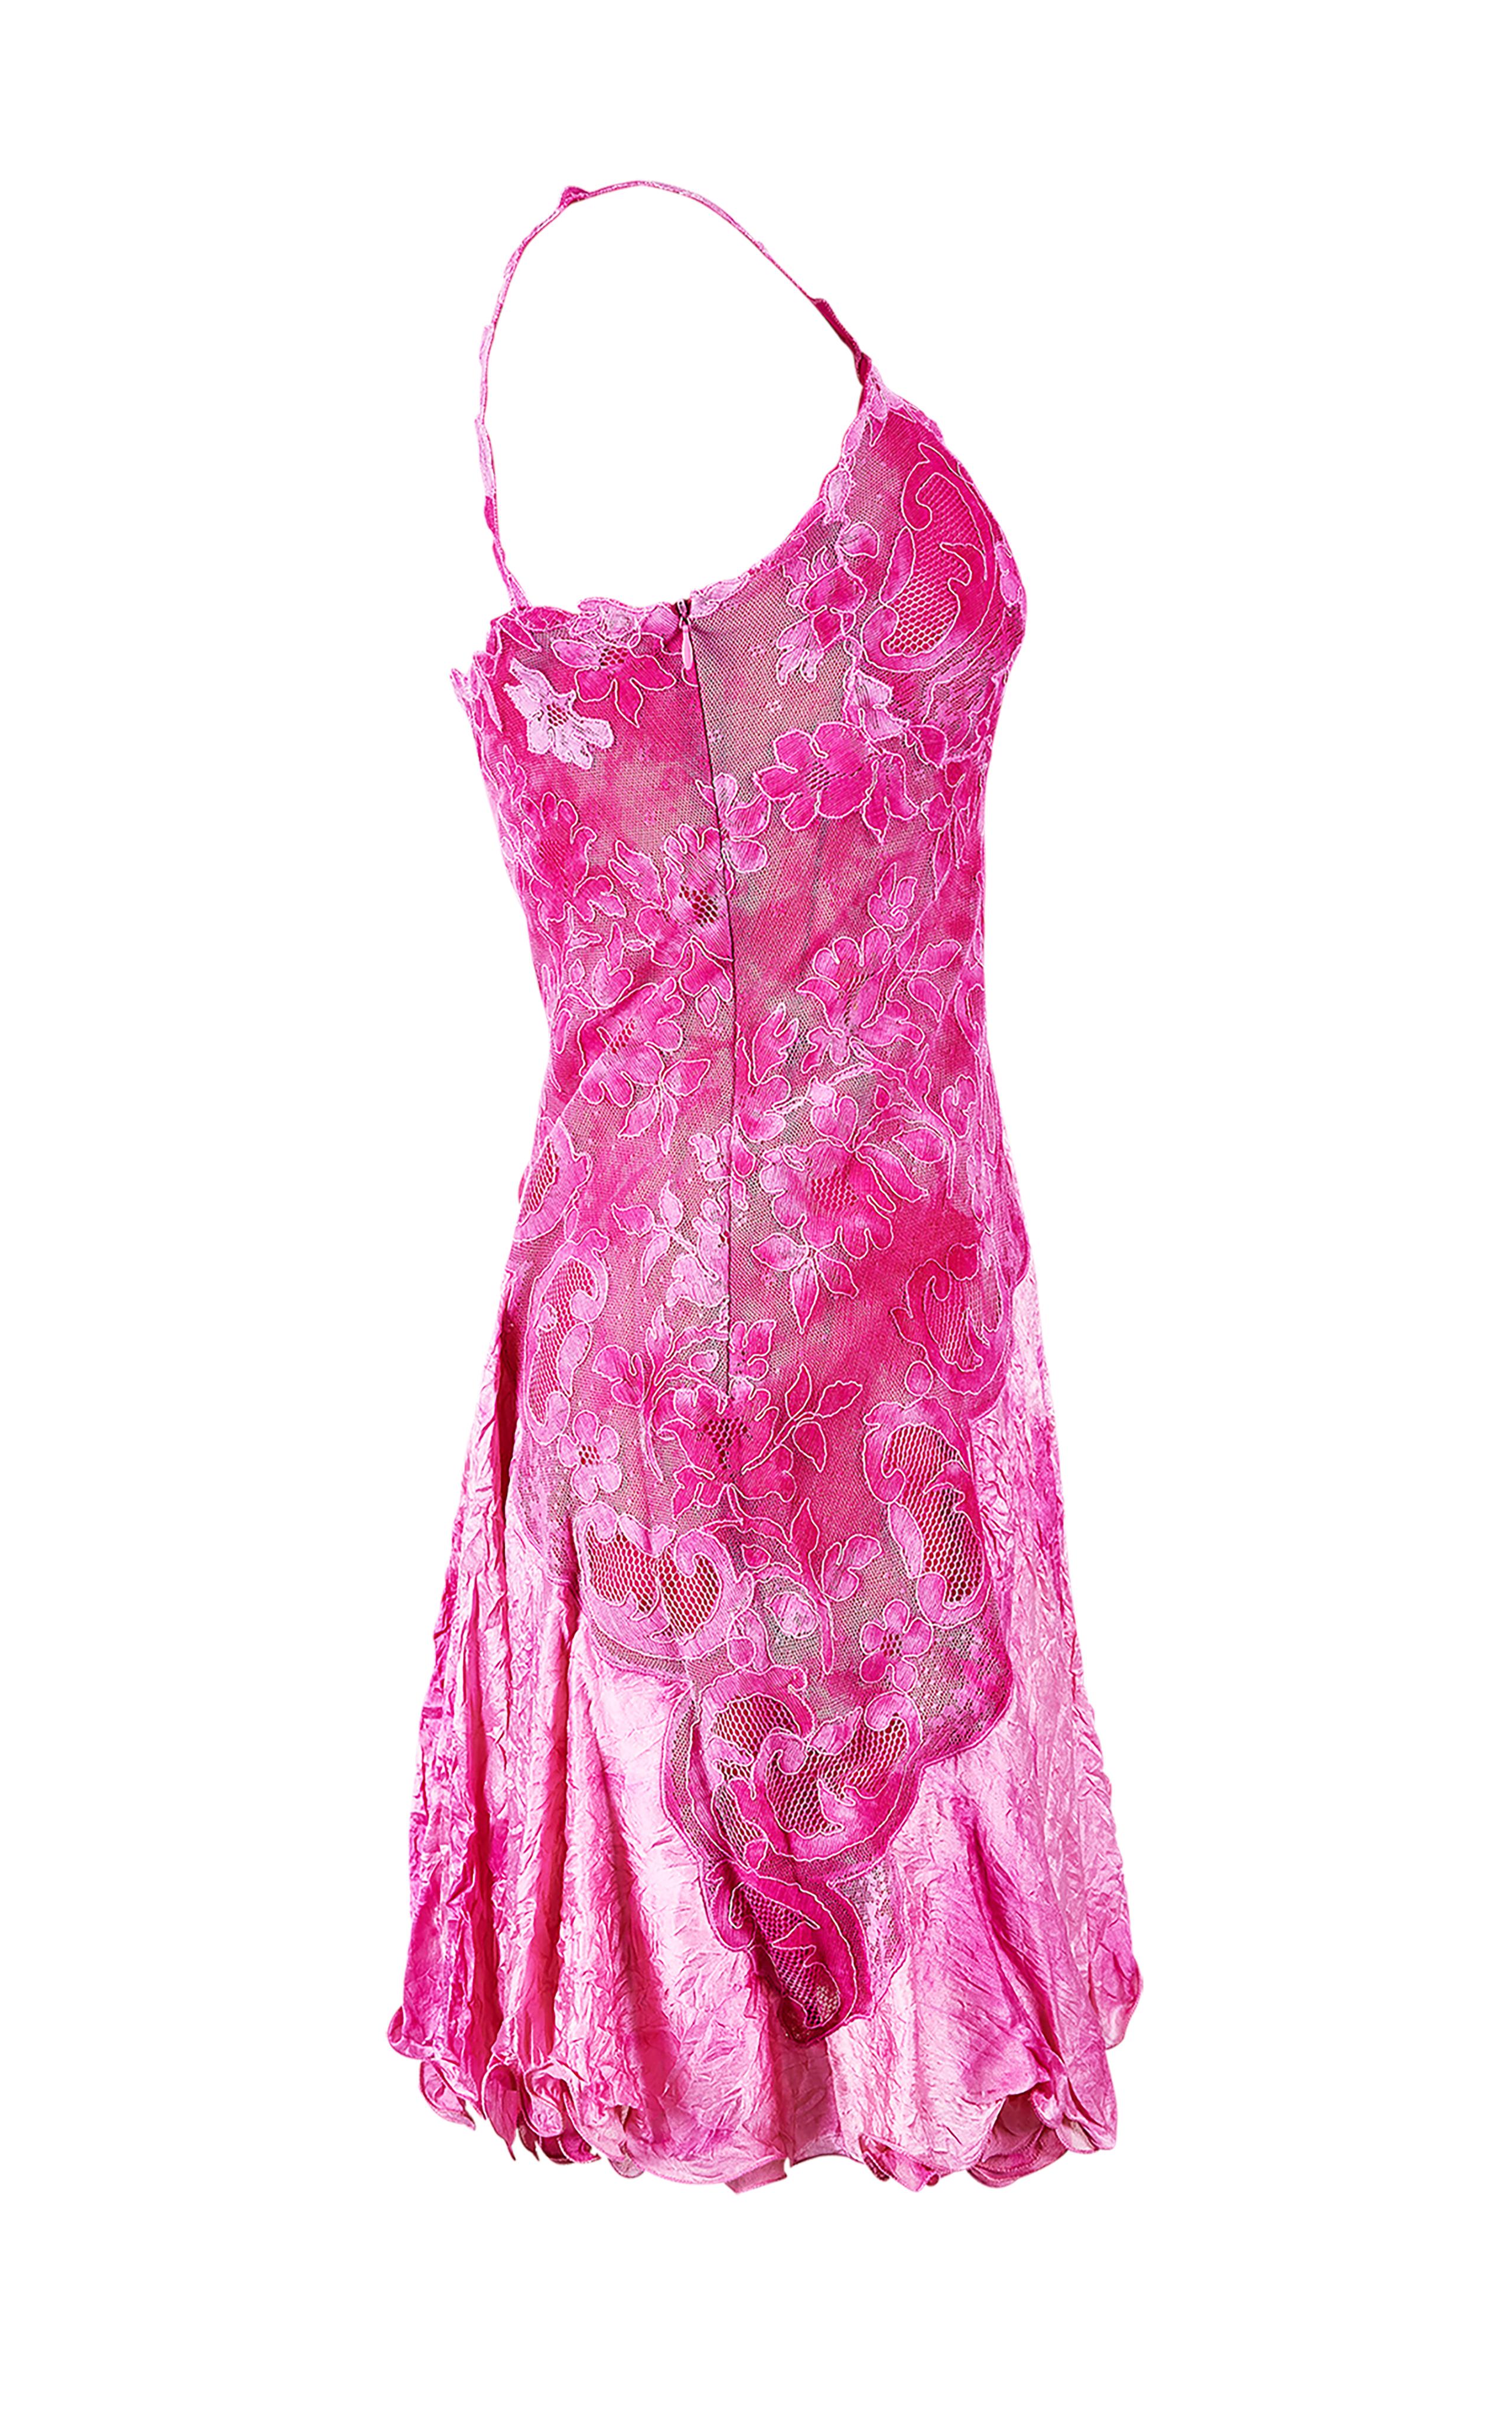 S/S 1994 Gianni Versace Pink Crinkle Mini Dress For Sale at 1stDibs